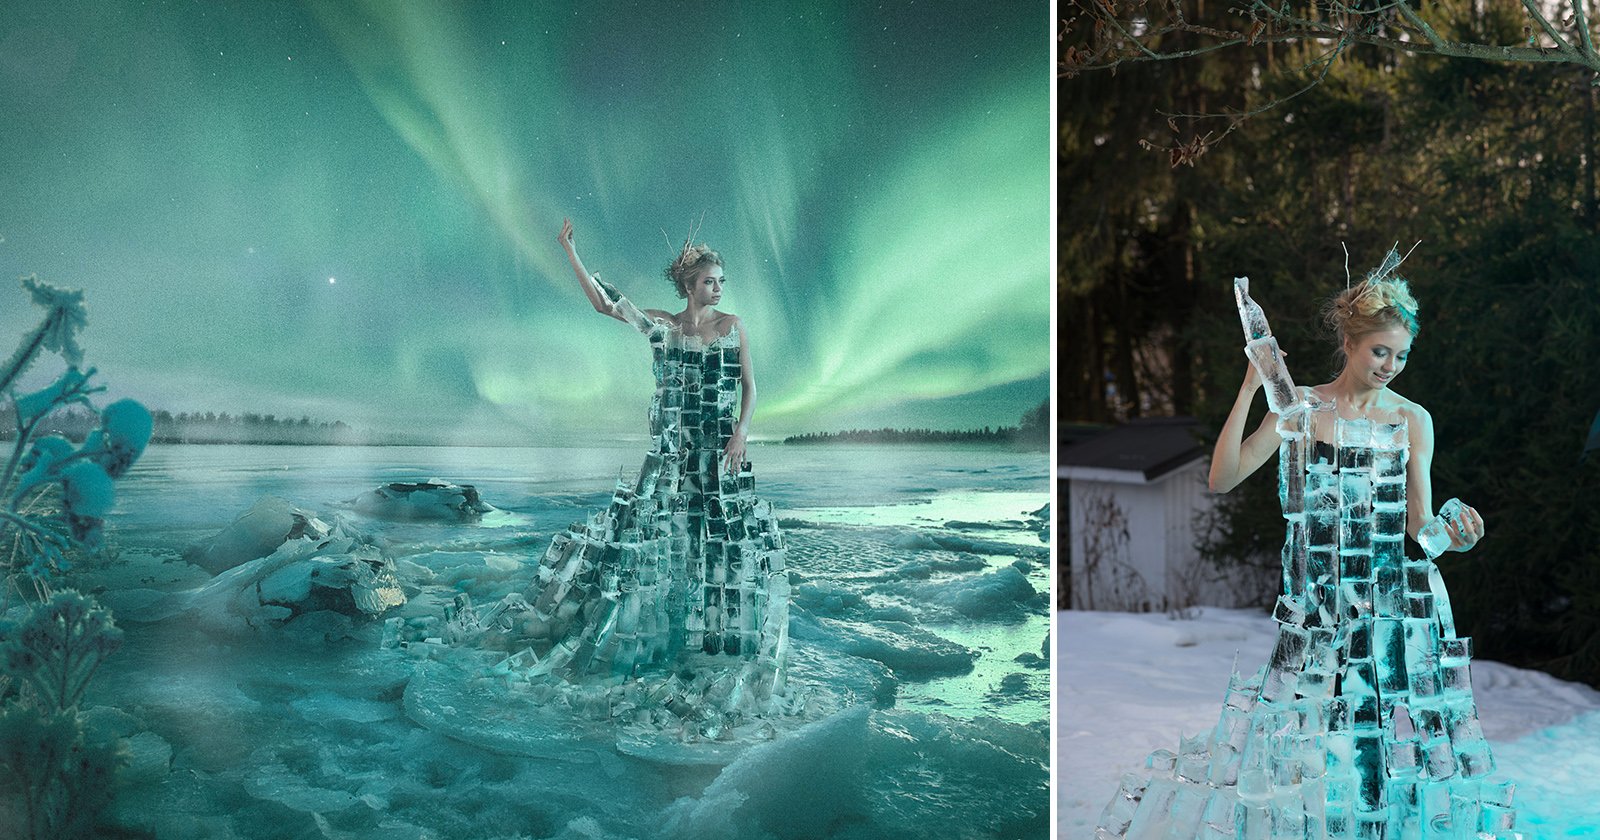 This Photographer Built an Ice Dress for Her Maiden of Finland Photo Shoot